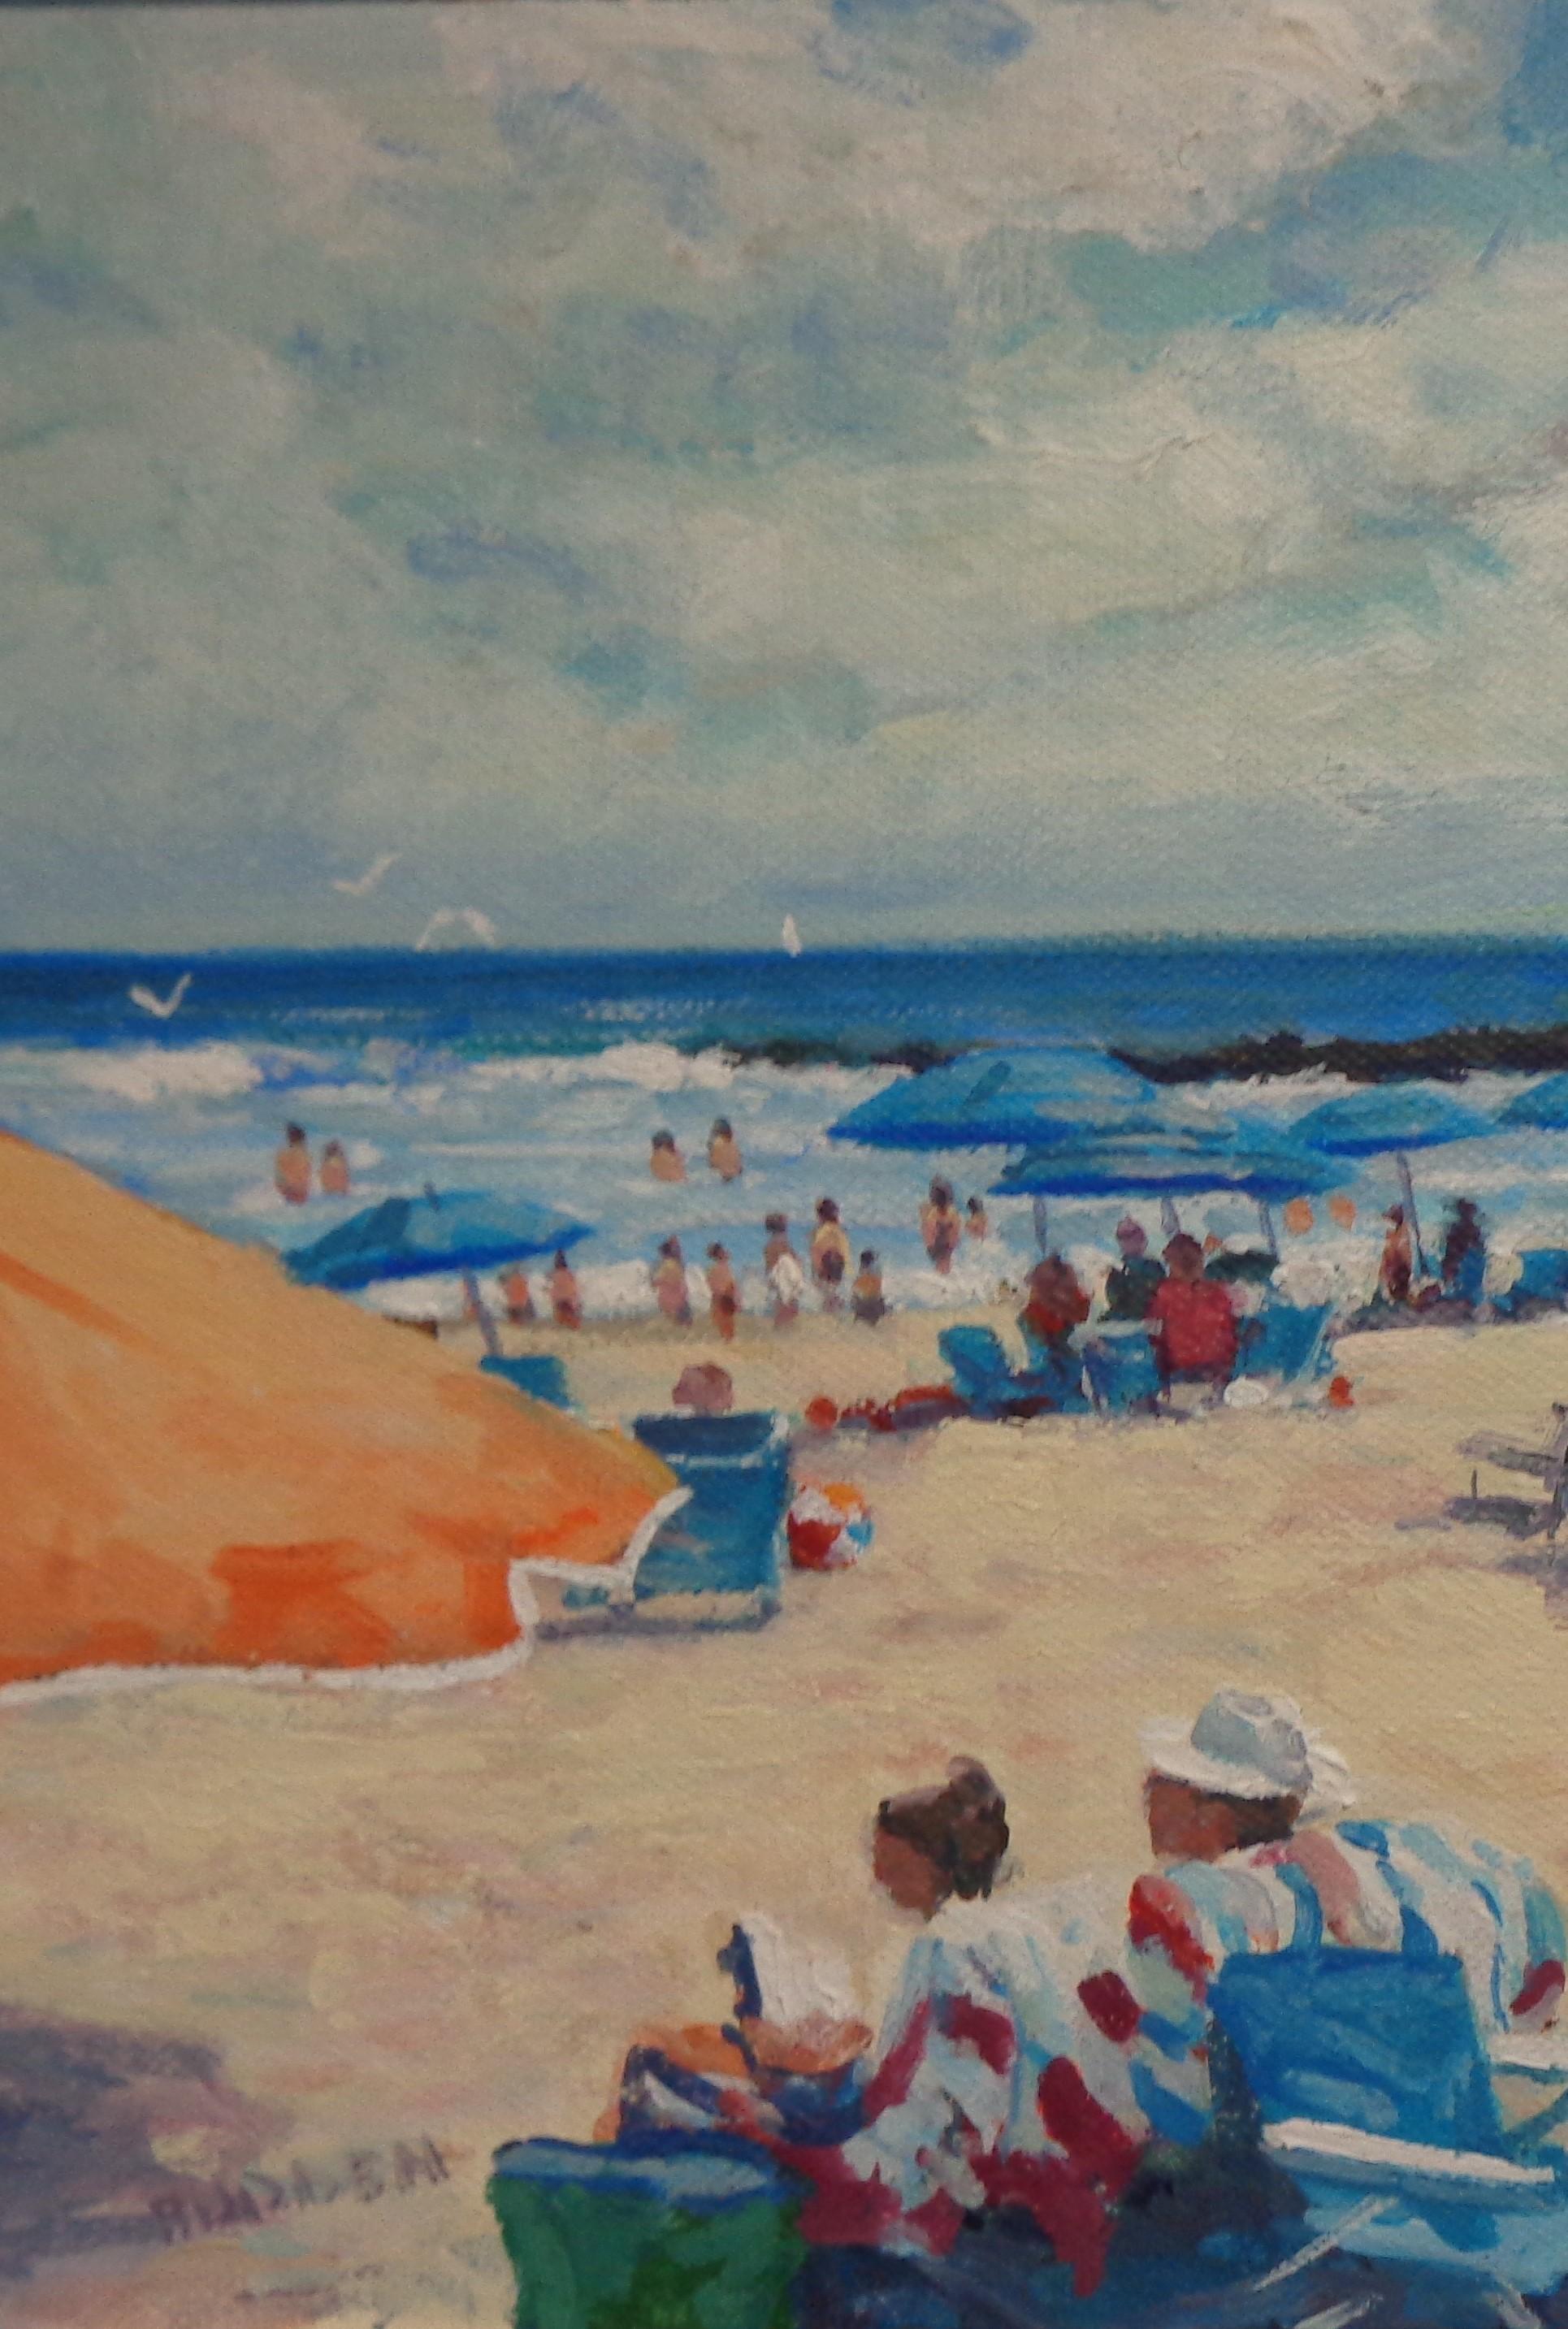  Impressionistic Seascape Painting Michael Budden Beach Day People Boats Birds For Sale 1